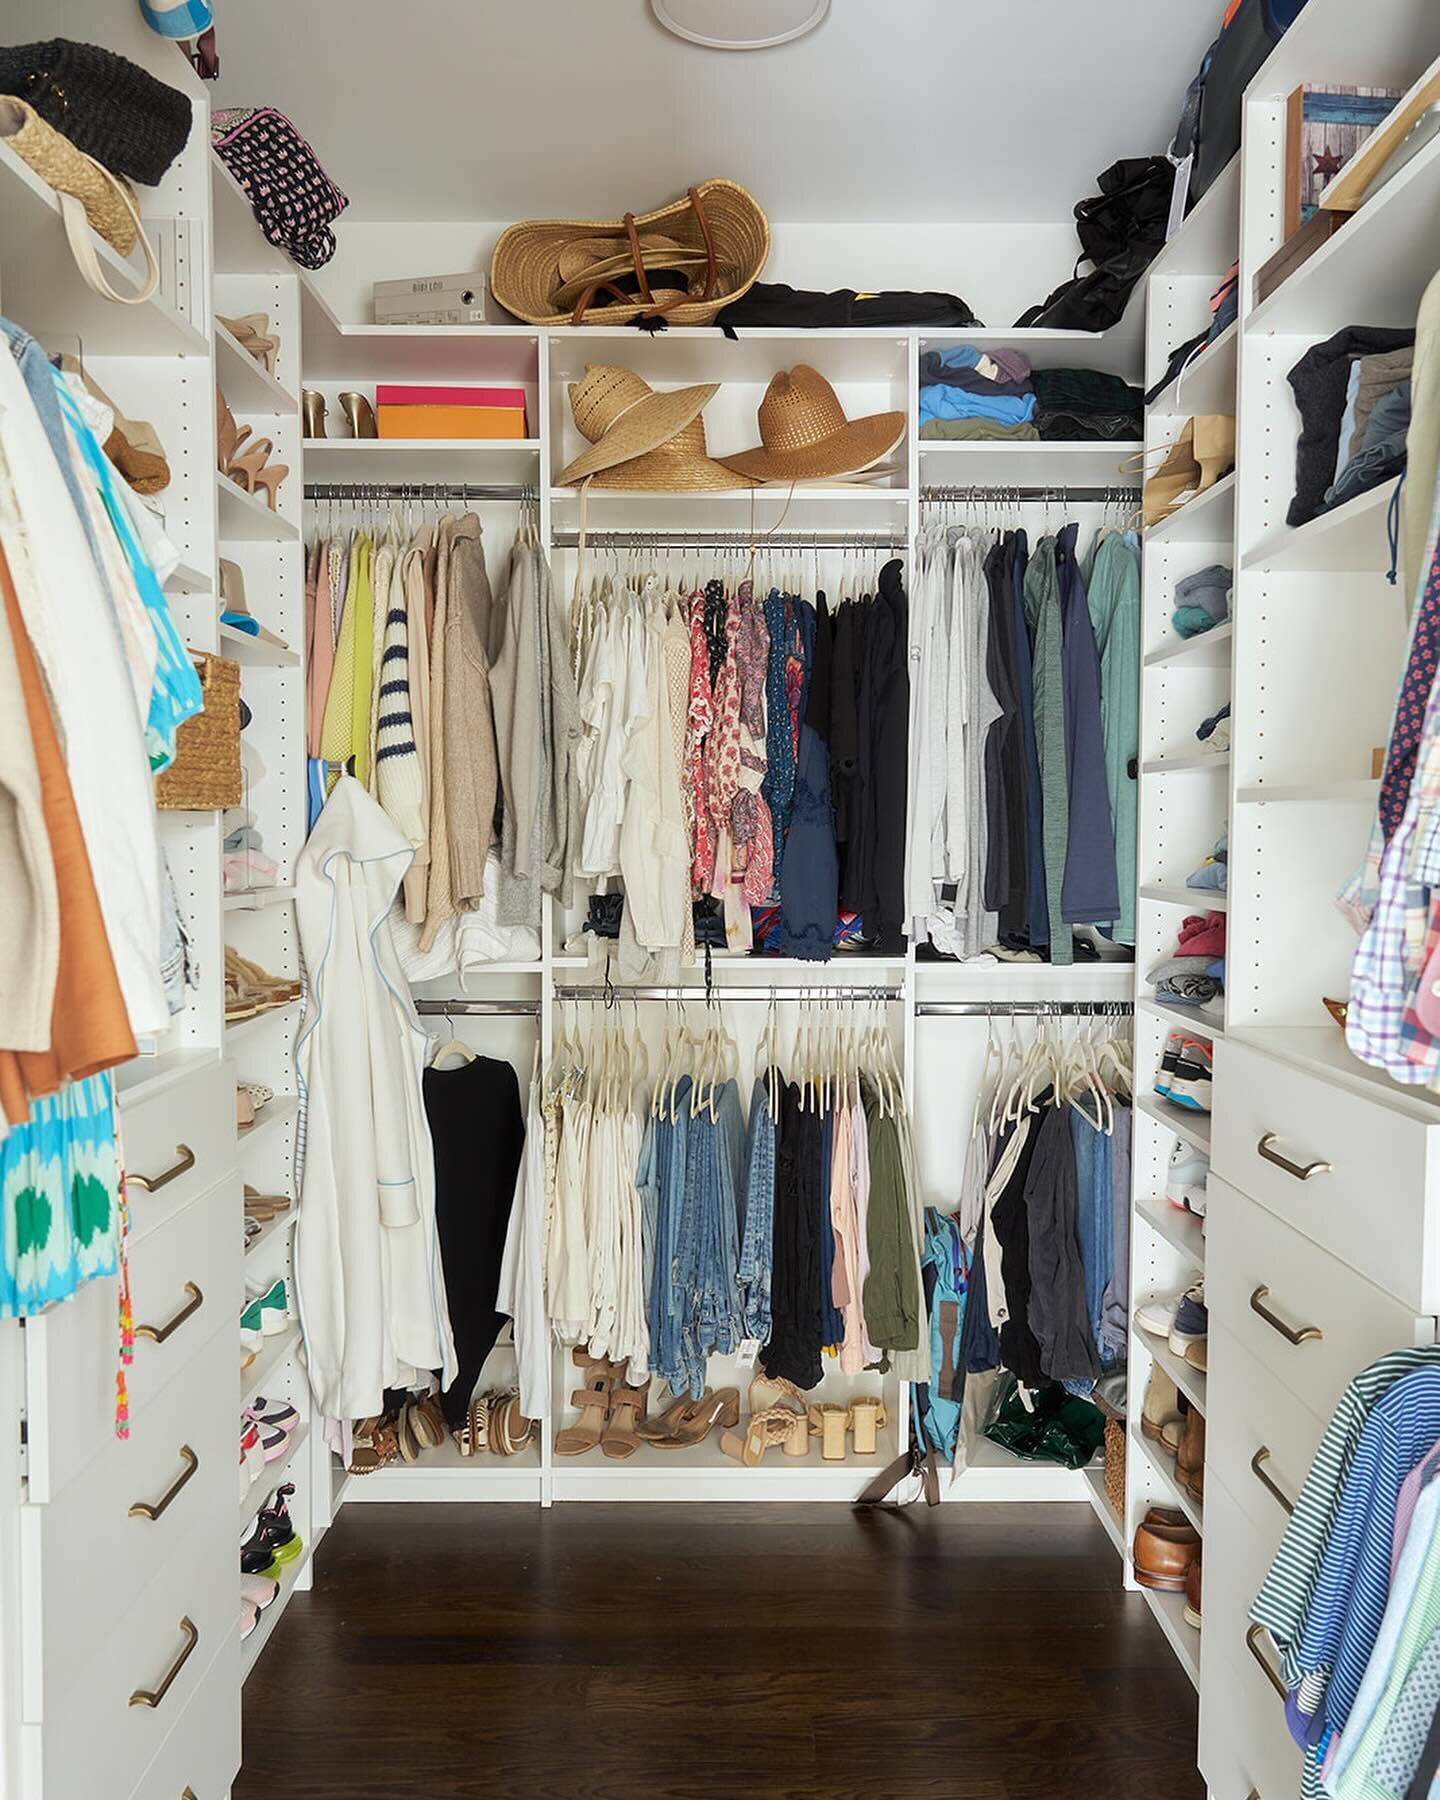 Swipe left to step into a world of closet dreams.

From custom shelving to dazzling lighting, what features would your dream closet include?

Wallpapered ceiling?
Shoe shelves that sparkle?
A vanity facing natural sunlight?
Or maybe a secret door?

C